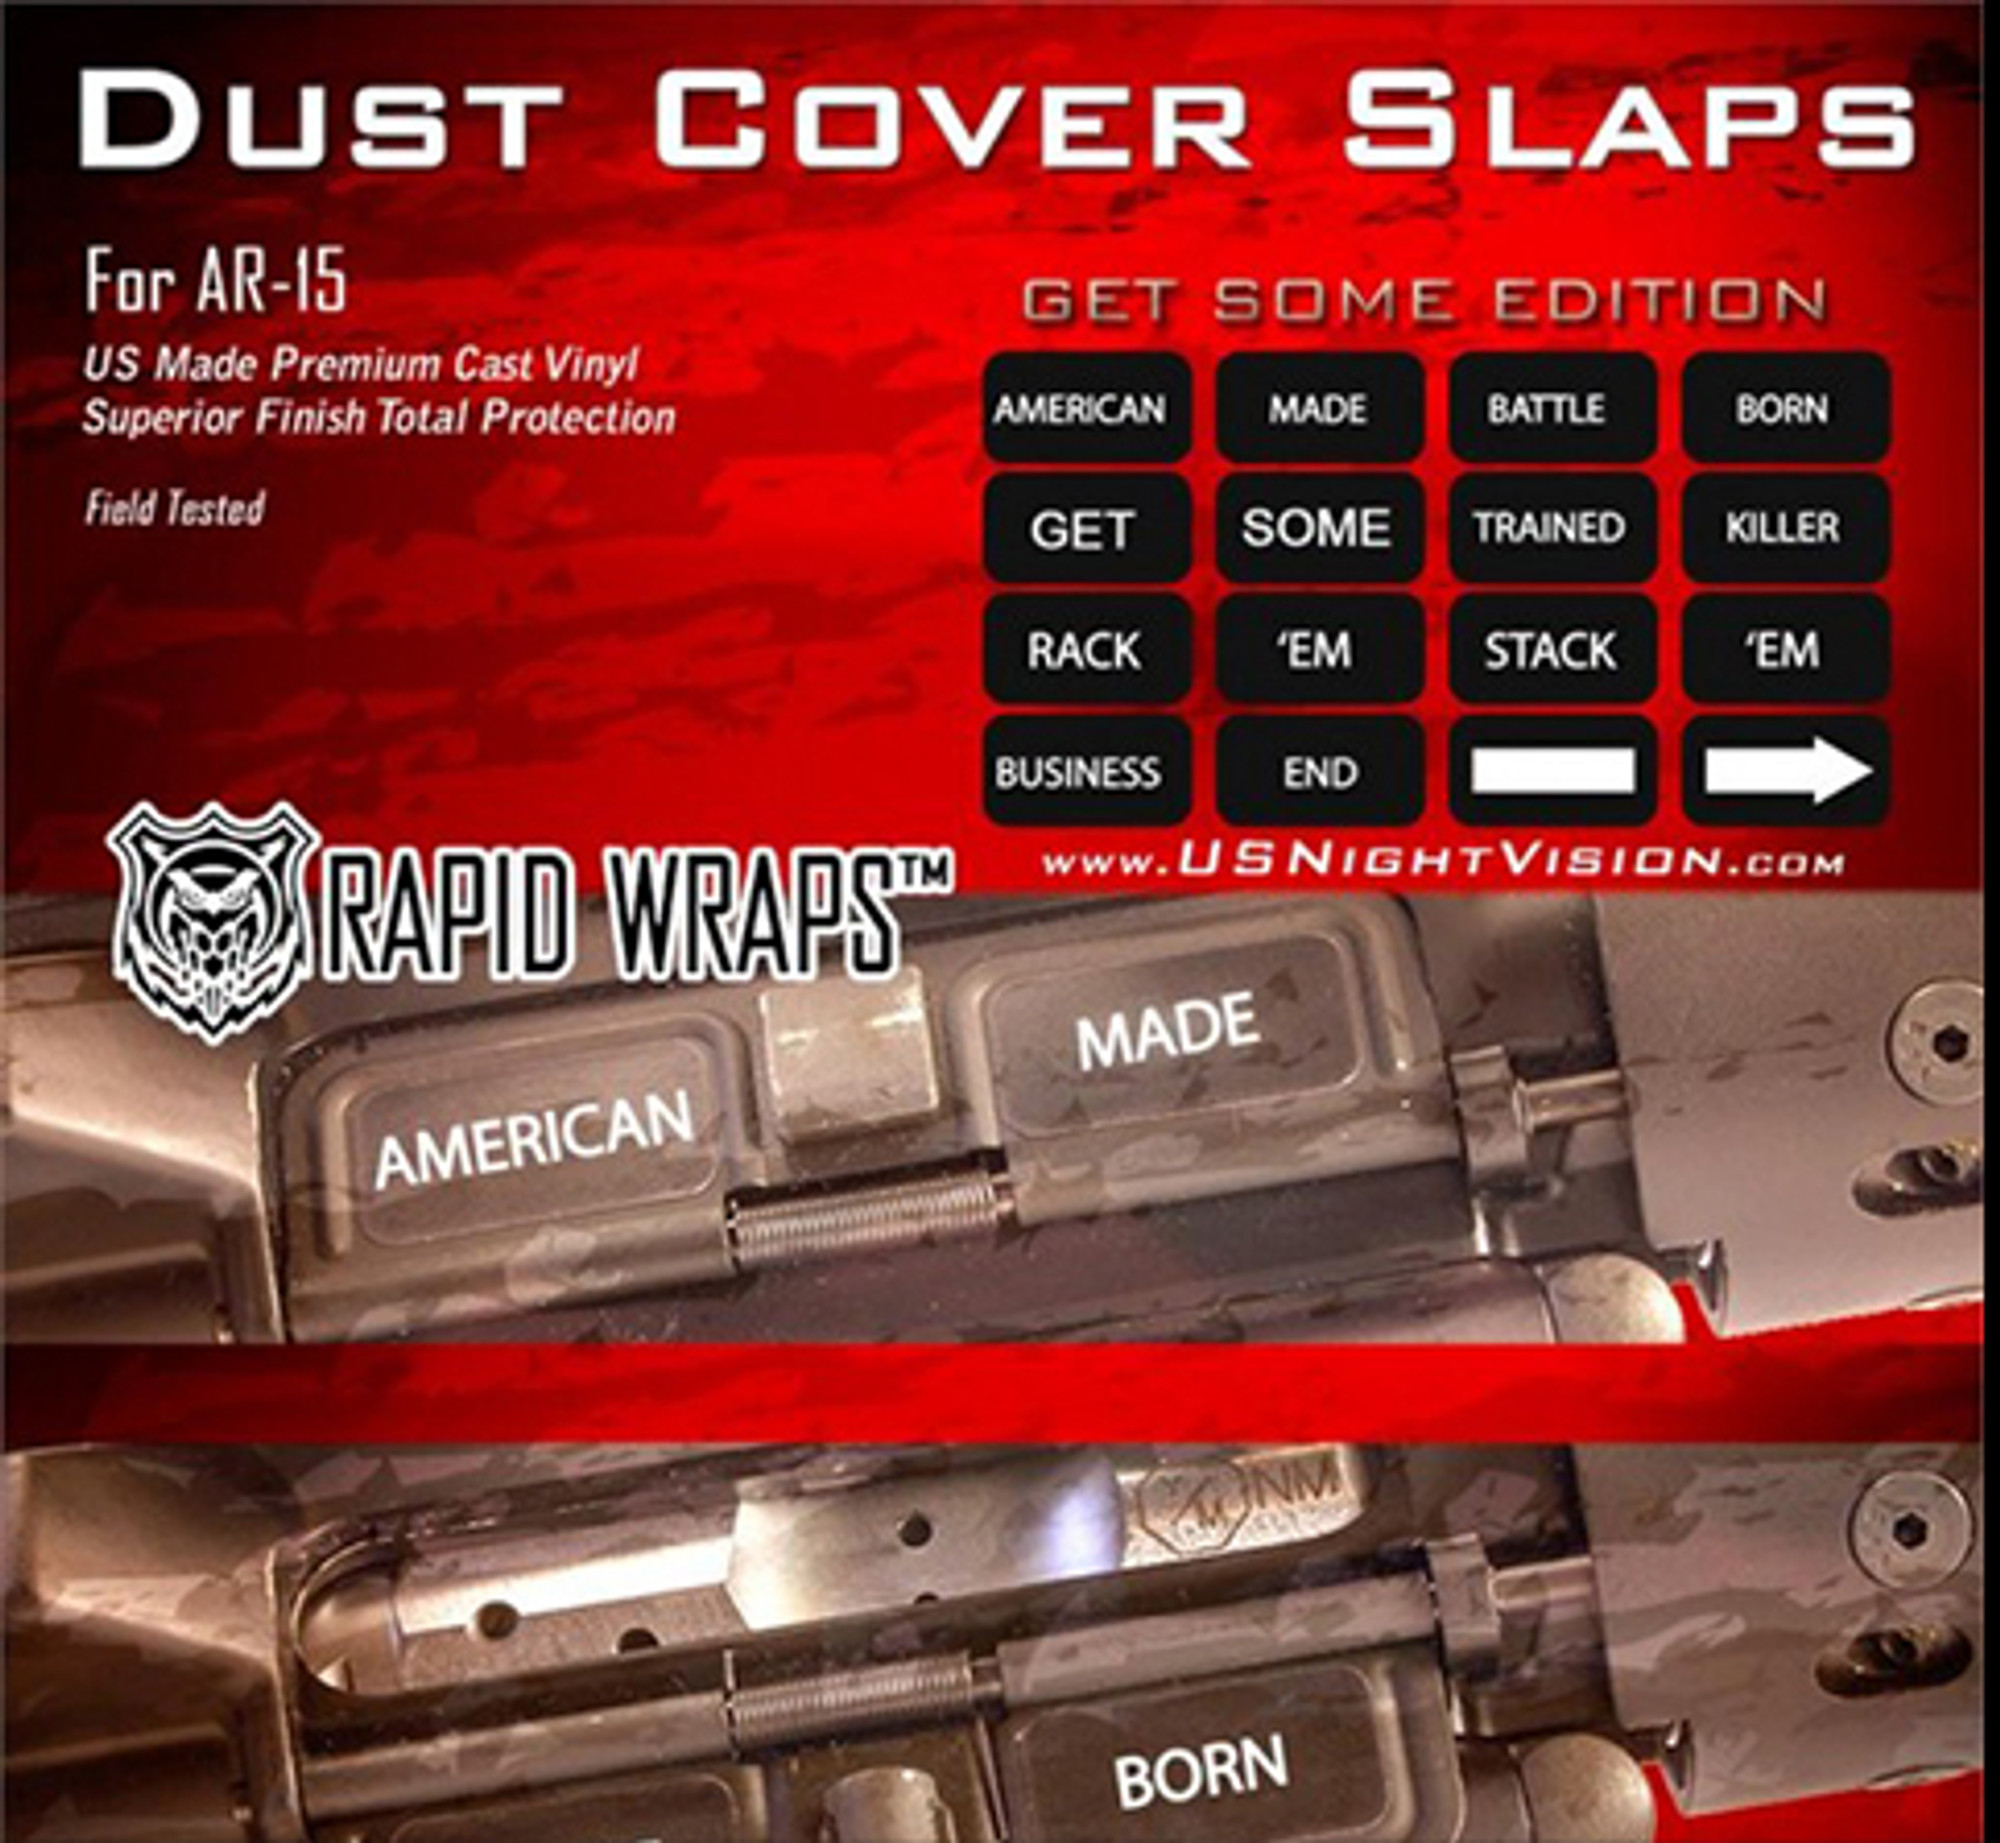 US NightVision Rapid Wraps™ Dust Cover Slaps - AR-15 Get Some Edition